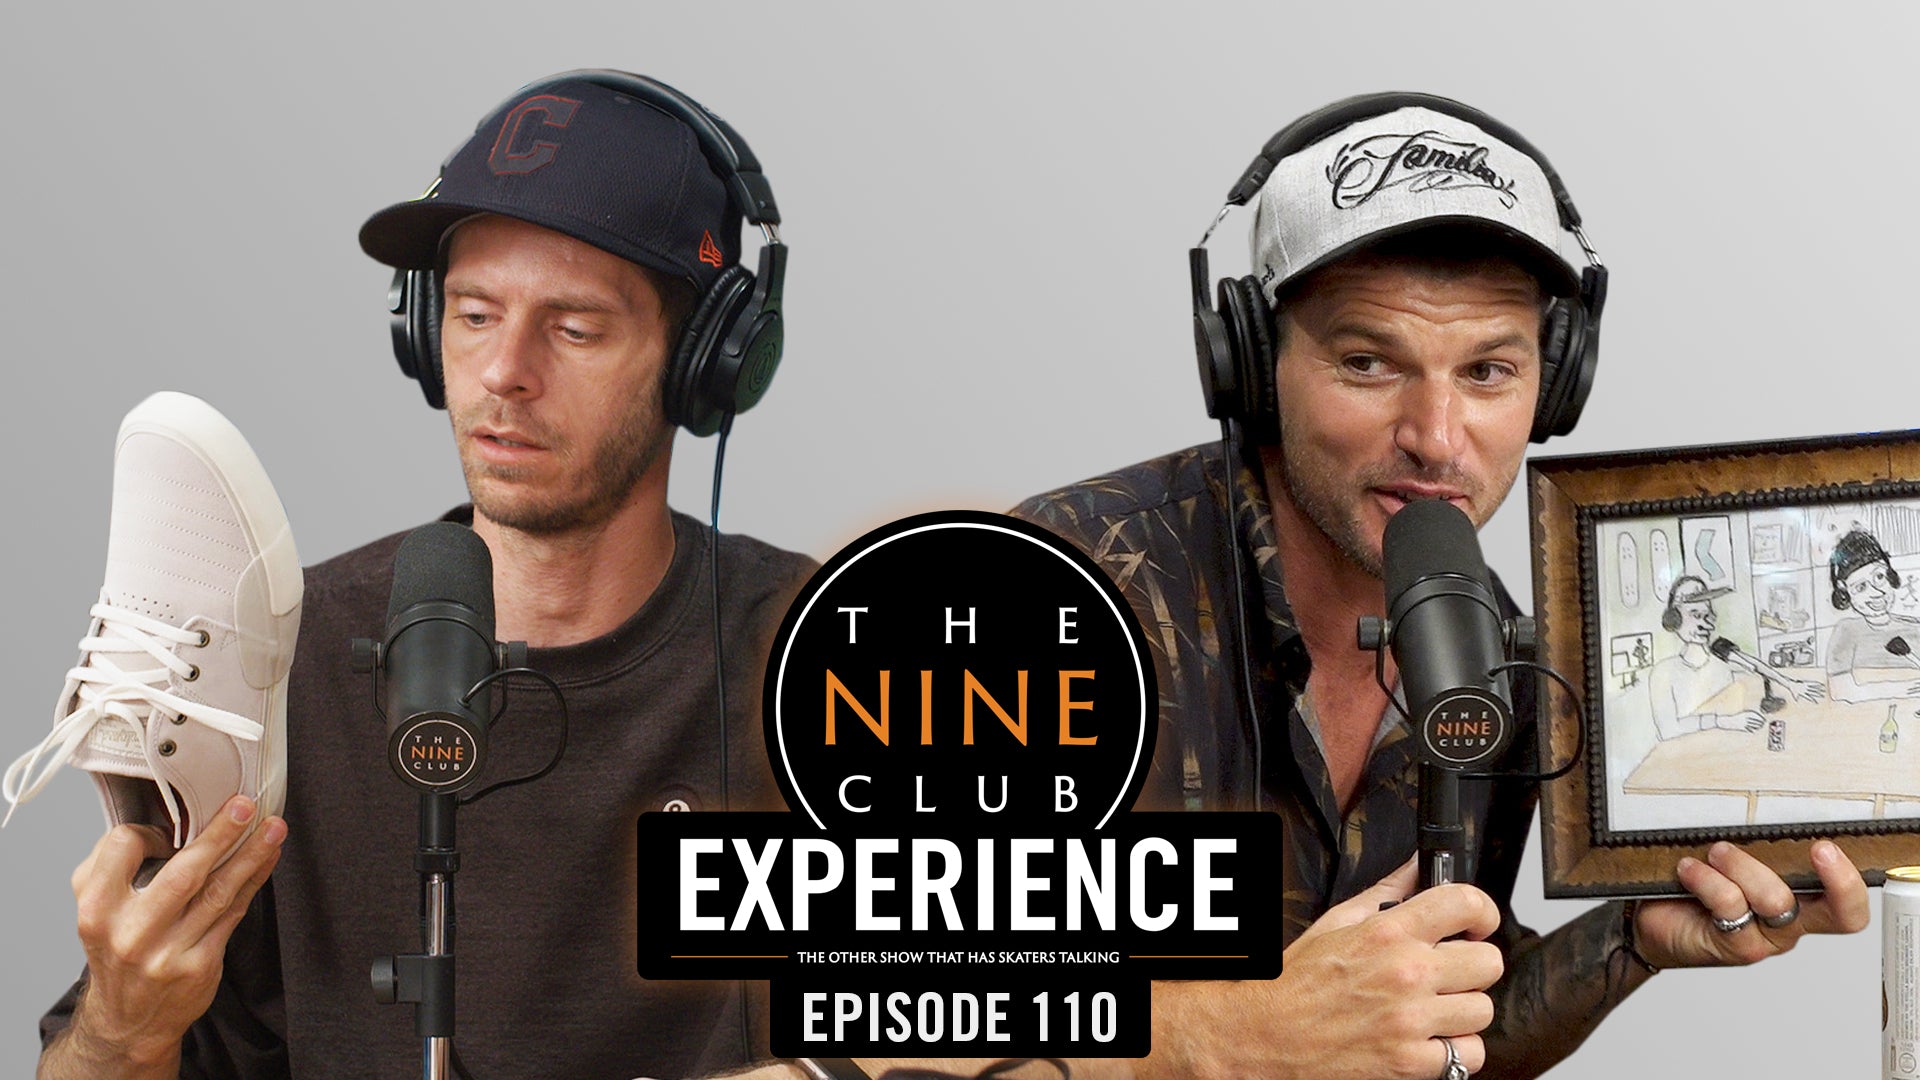 The Nine Club Experience Episode 110